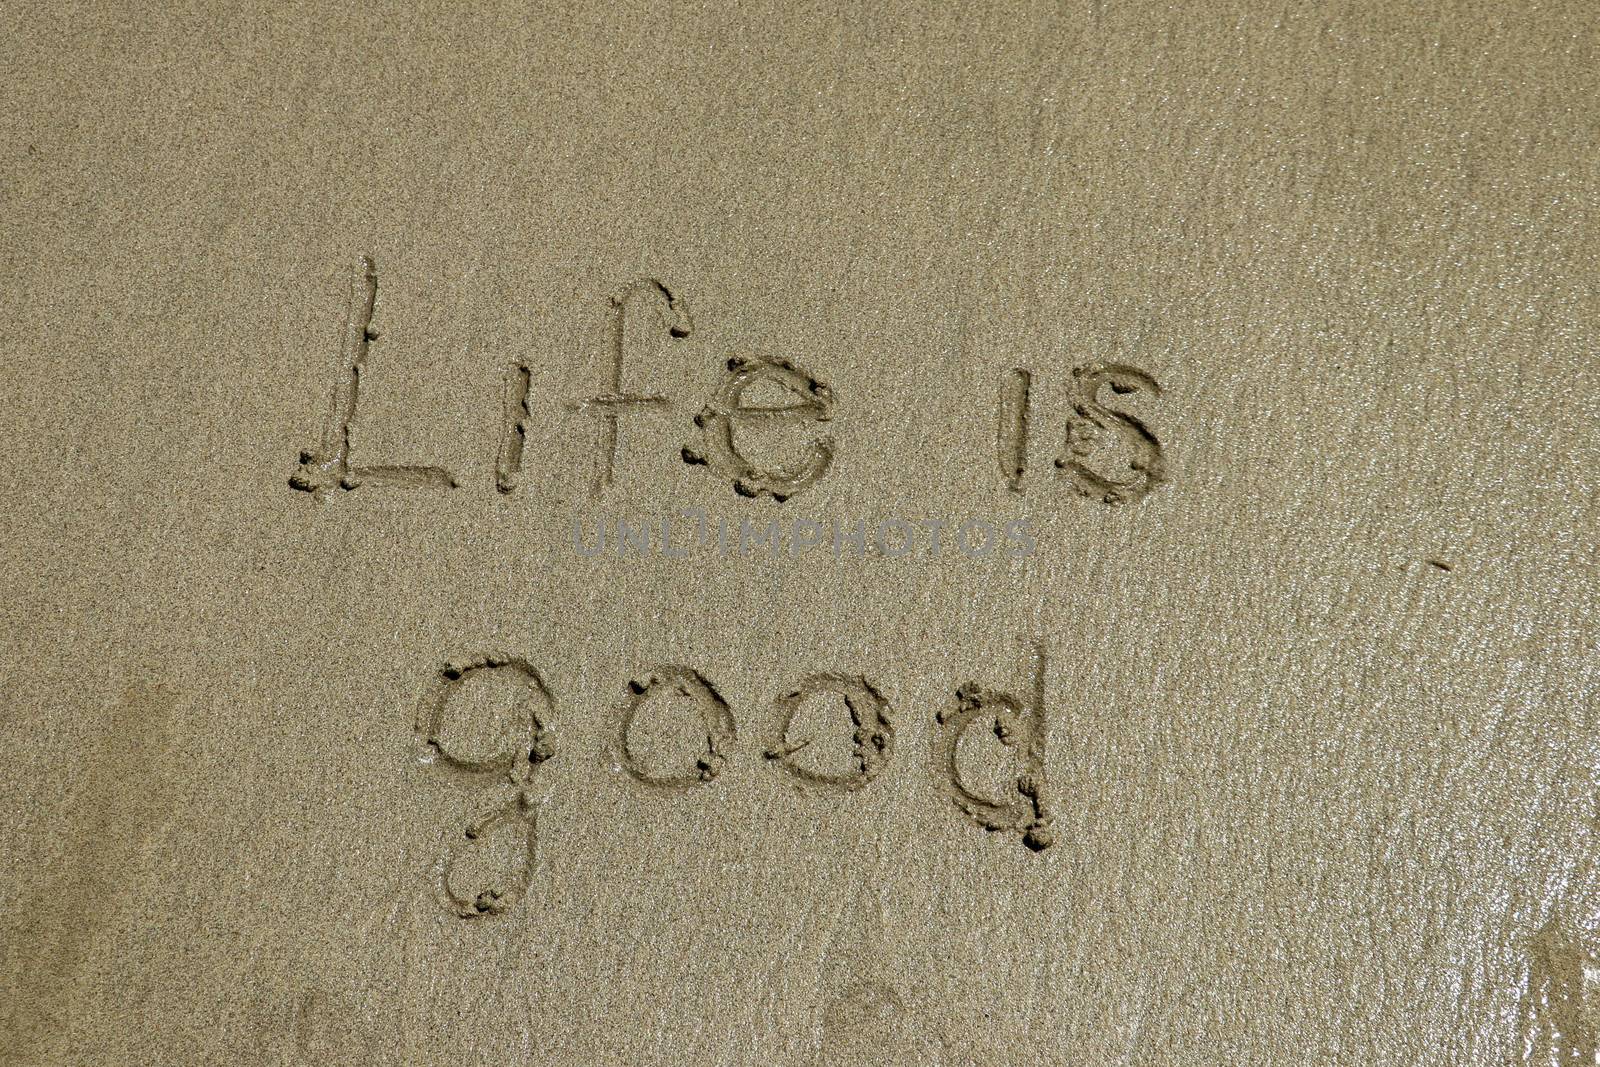 Life is good - positive thinking concept. Inspiration and motivation quote. The sign written on sand.